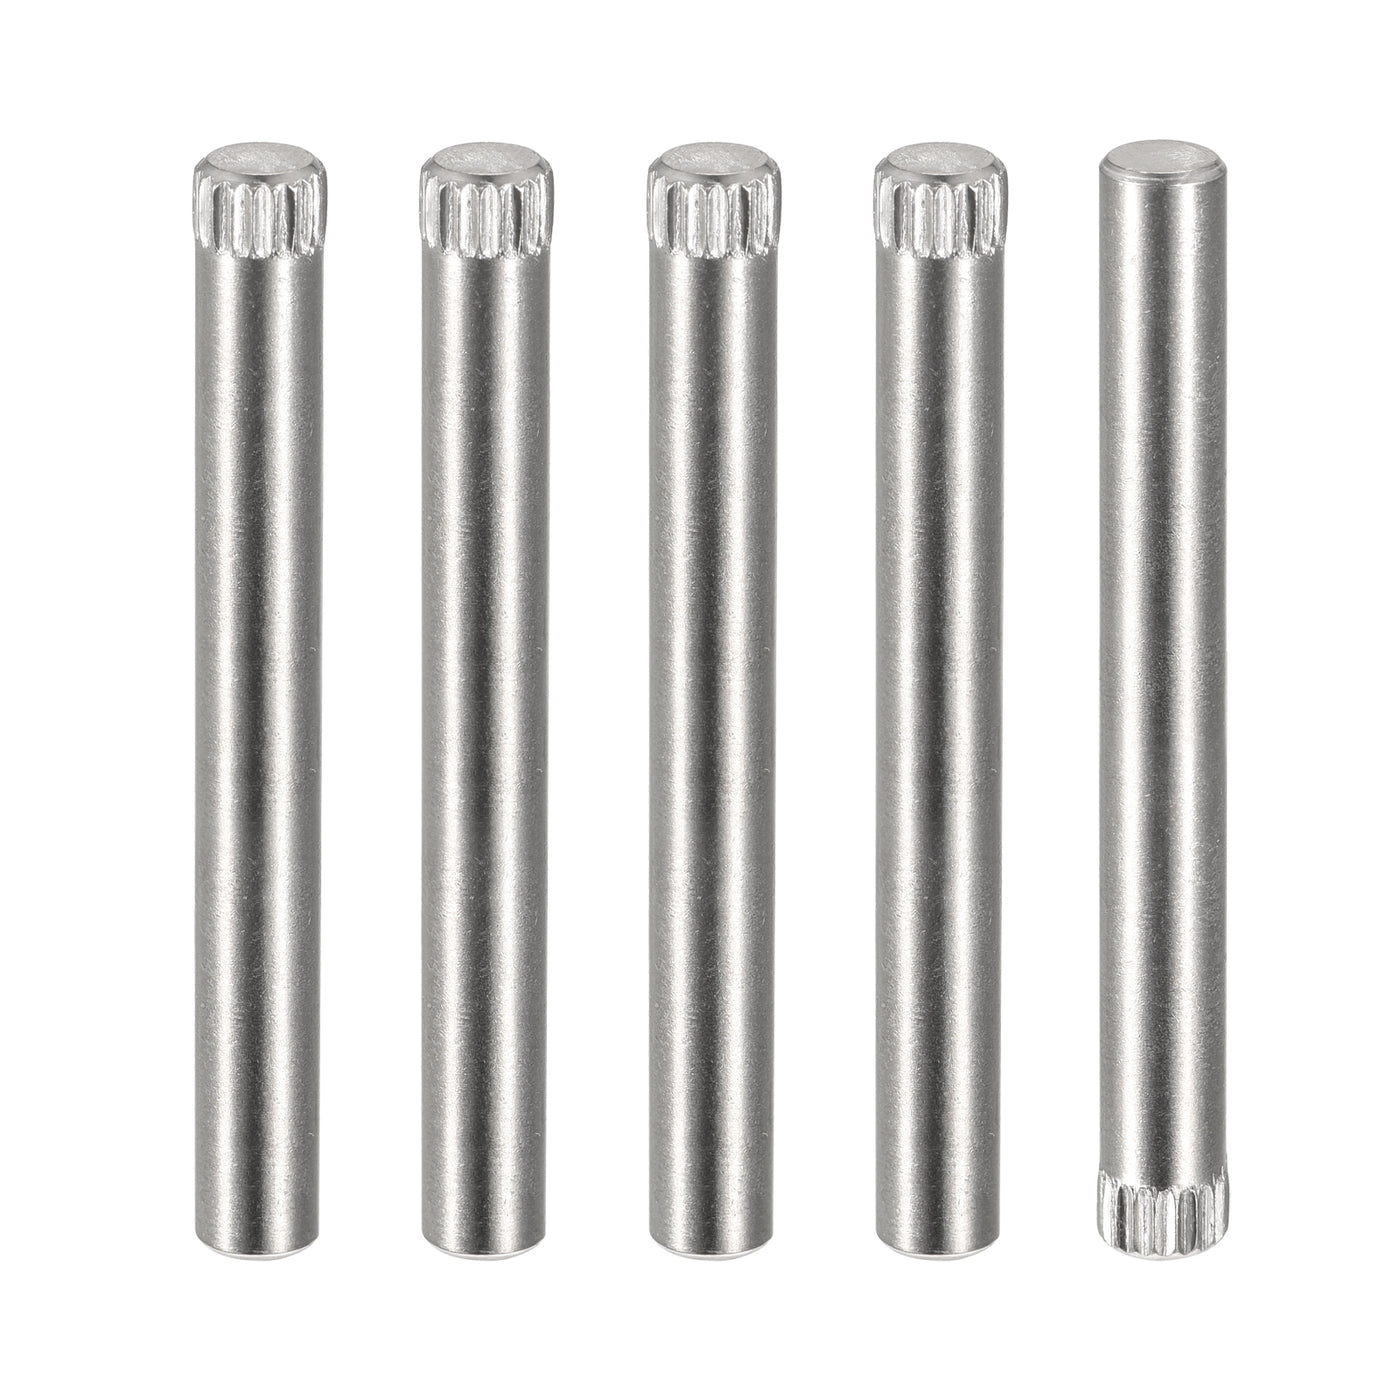 uxcell Uxcell 5x45mm 304 Stainless Steel Dowel Pins, 5Pcs Knurled Head Flat End Dowel Pin